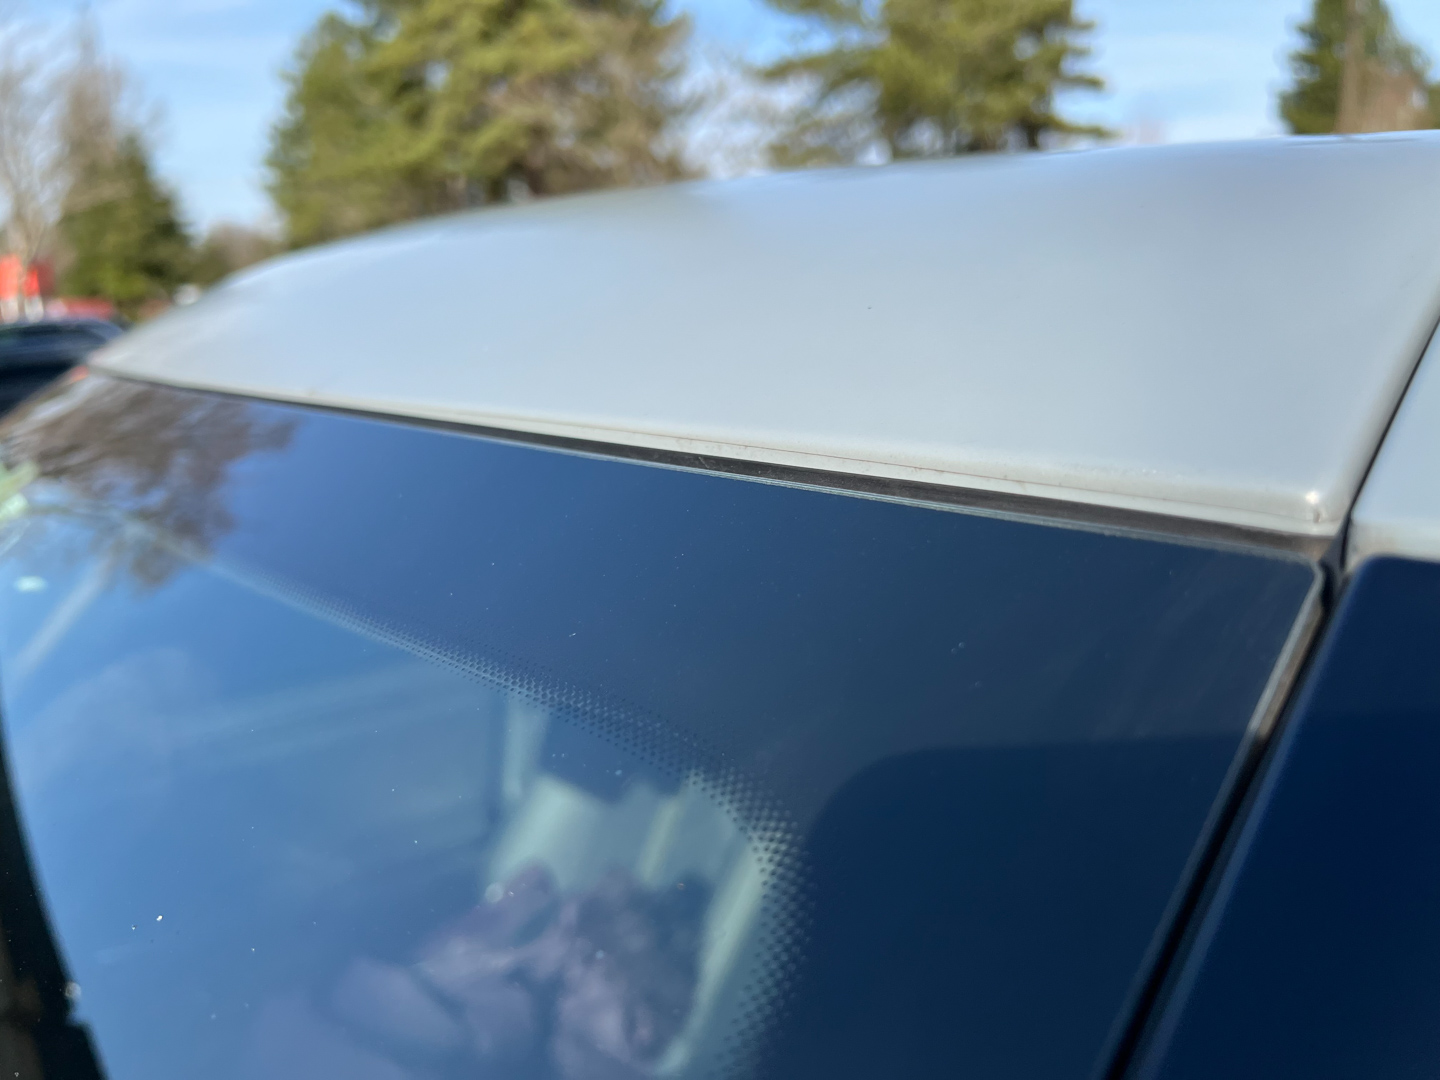 Rivian R1T R1S Poor Quality Stealth Satin PPF Clear Bra on Rivian R1T - Be Careful When Price Shopping BAD-poor-quality-rivian-r1t-xpel-stealth-redmond-clear-bra-ppf-paint-protection-film-22